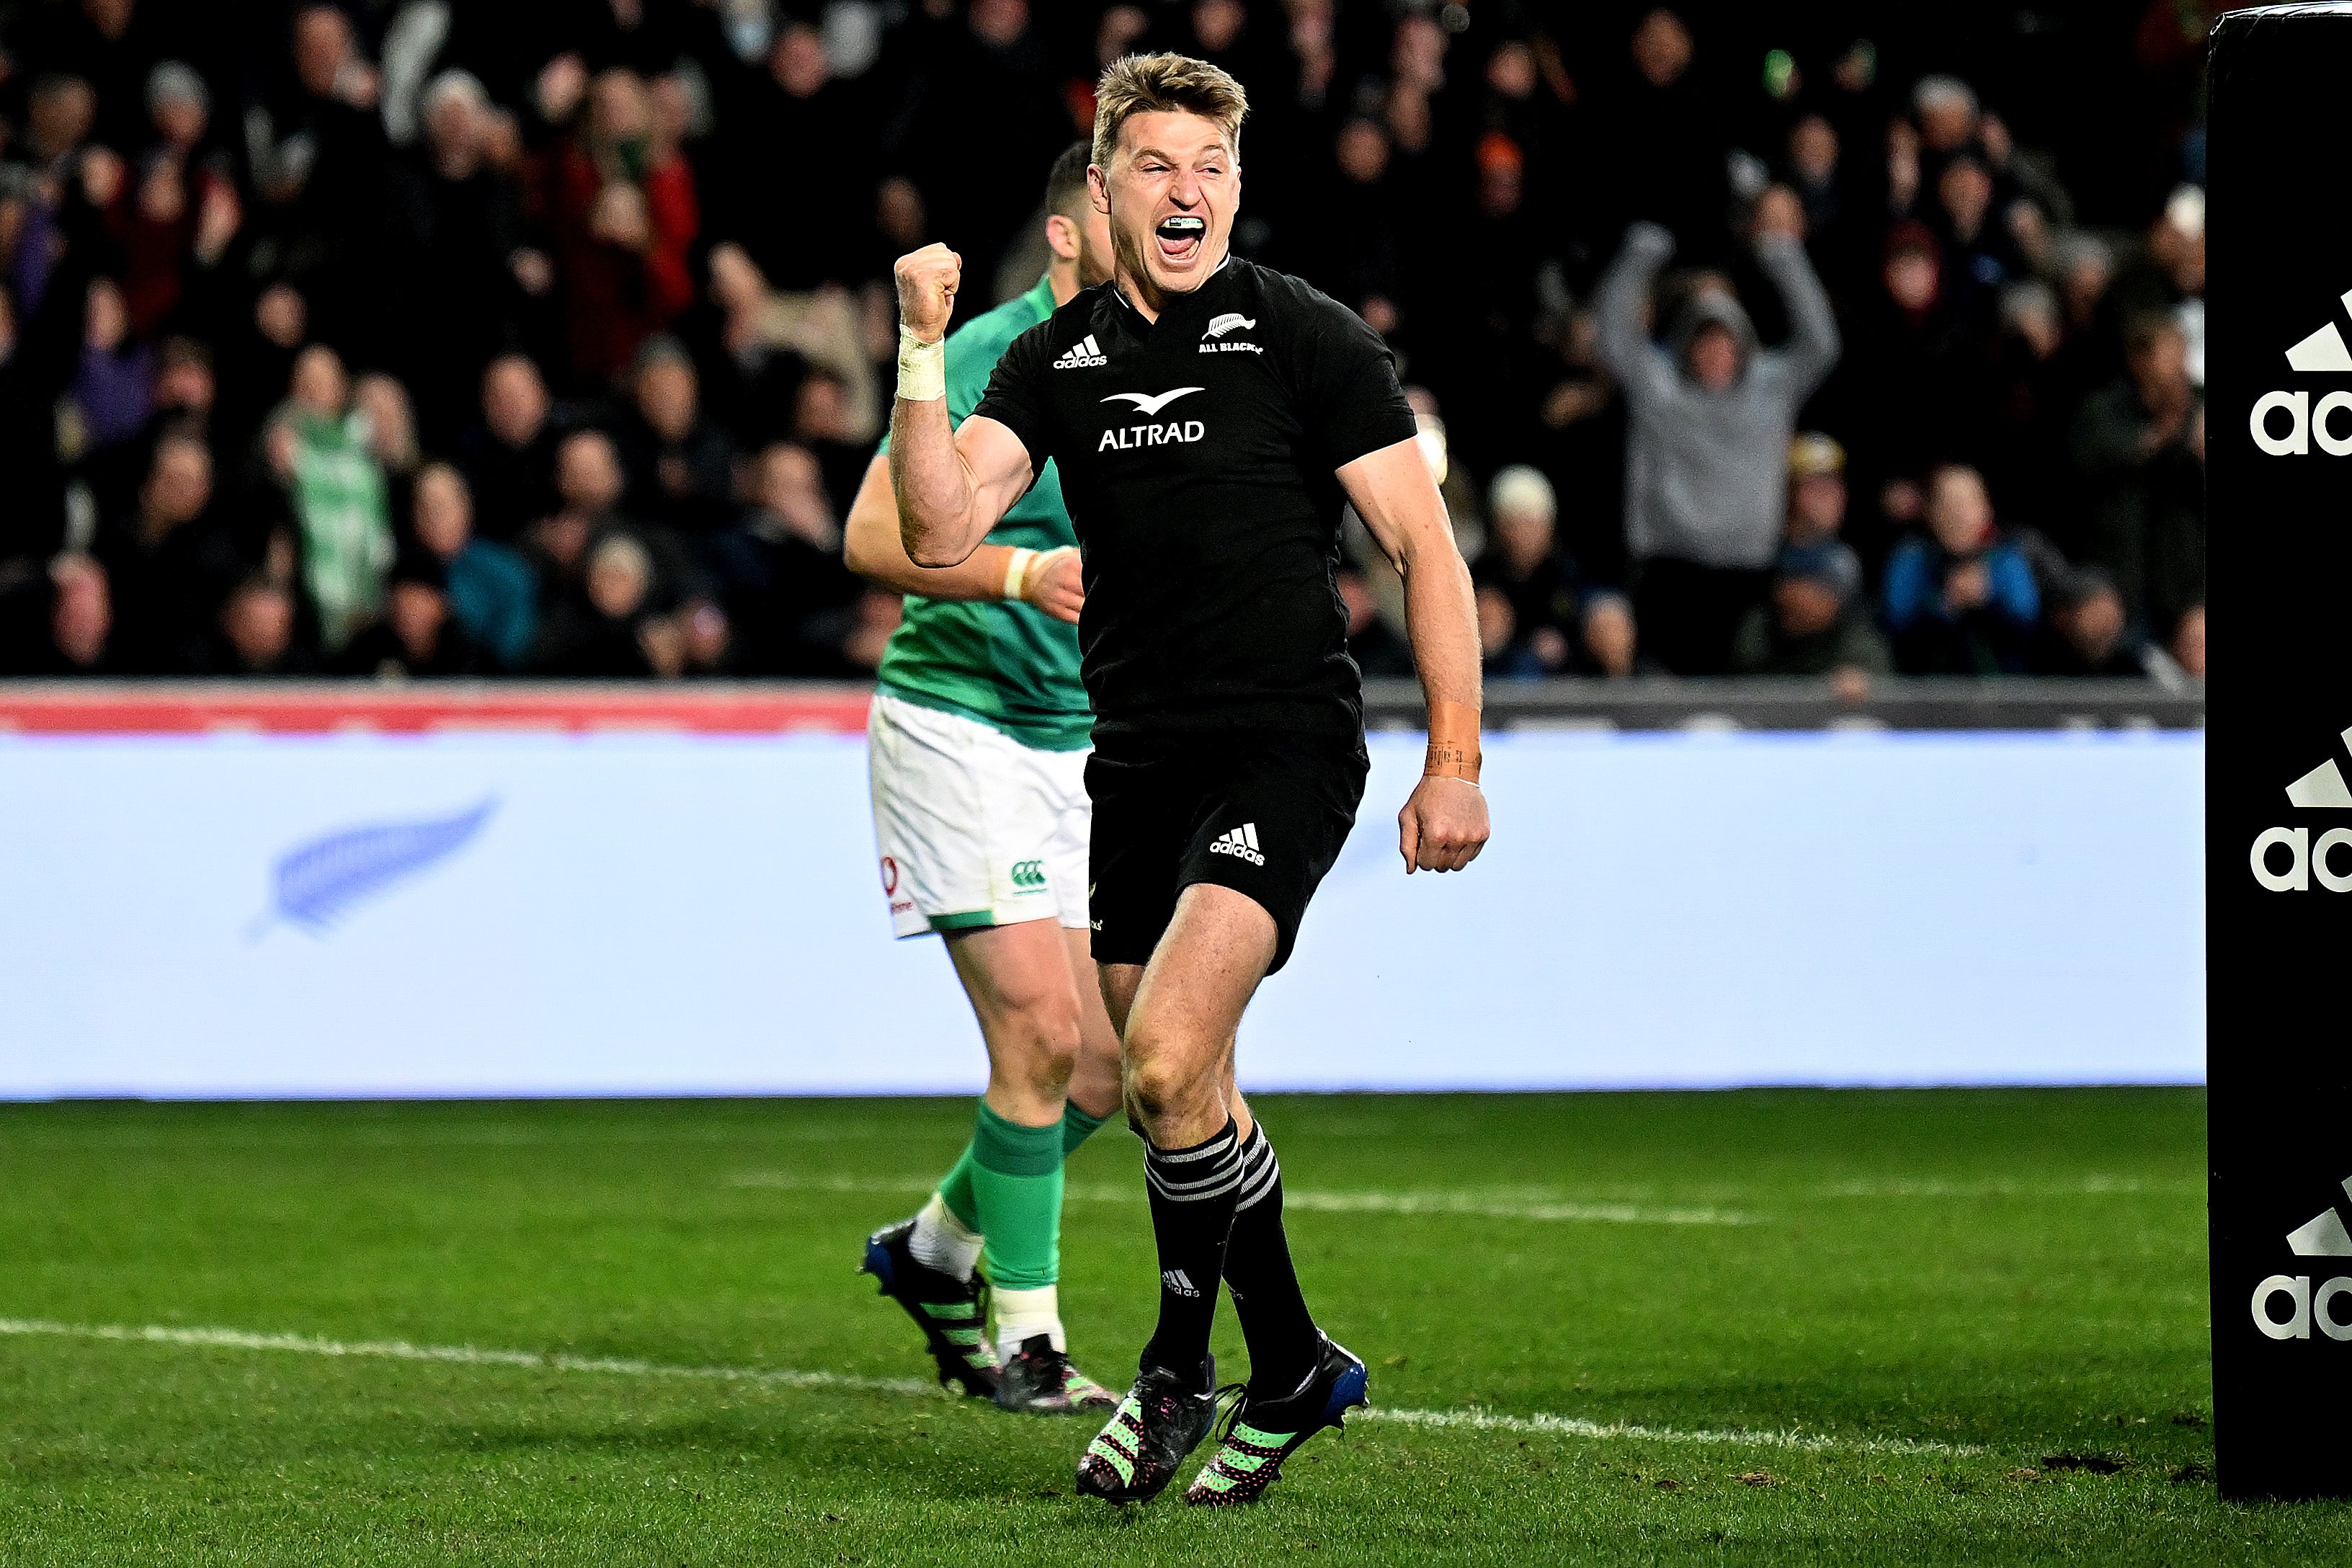 Beauden Barrett of the All Blacks celebrates after scoring a try